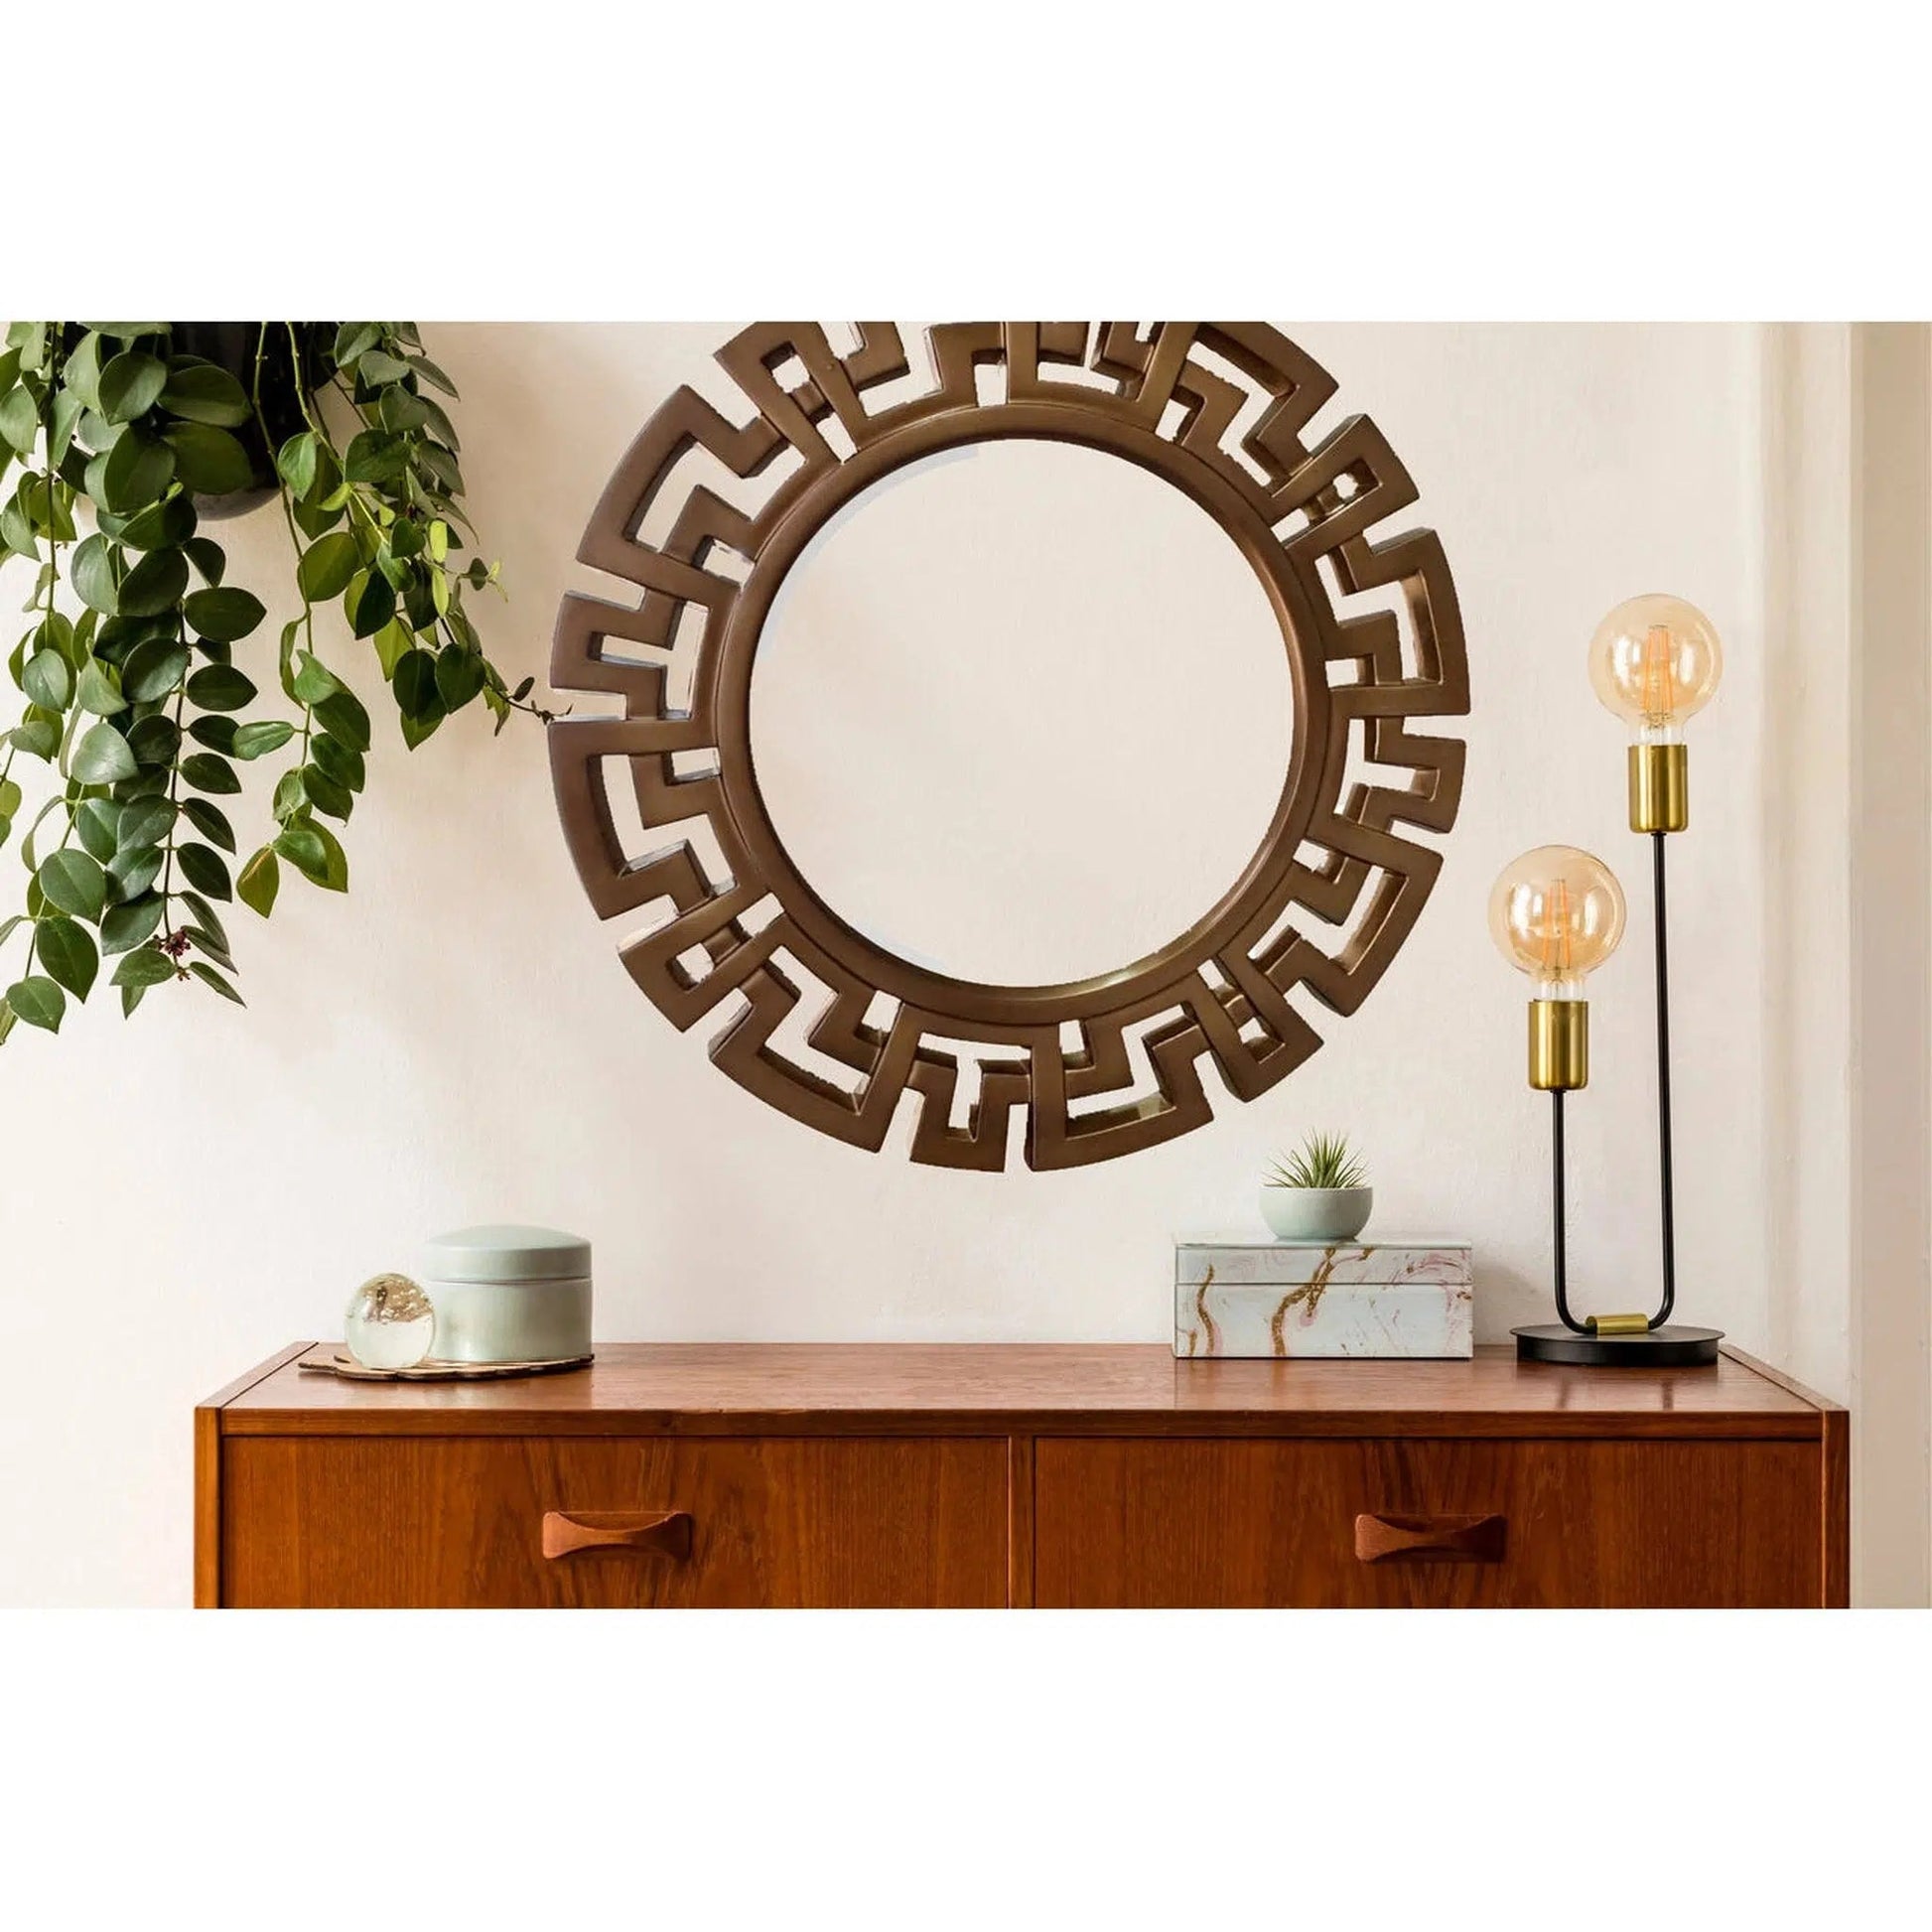 SBC Decor Athena 30" x 30" Wall-Mounted Glass Resin Accent Wall Mirror In Bronze Finish